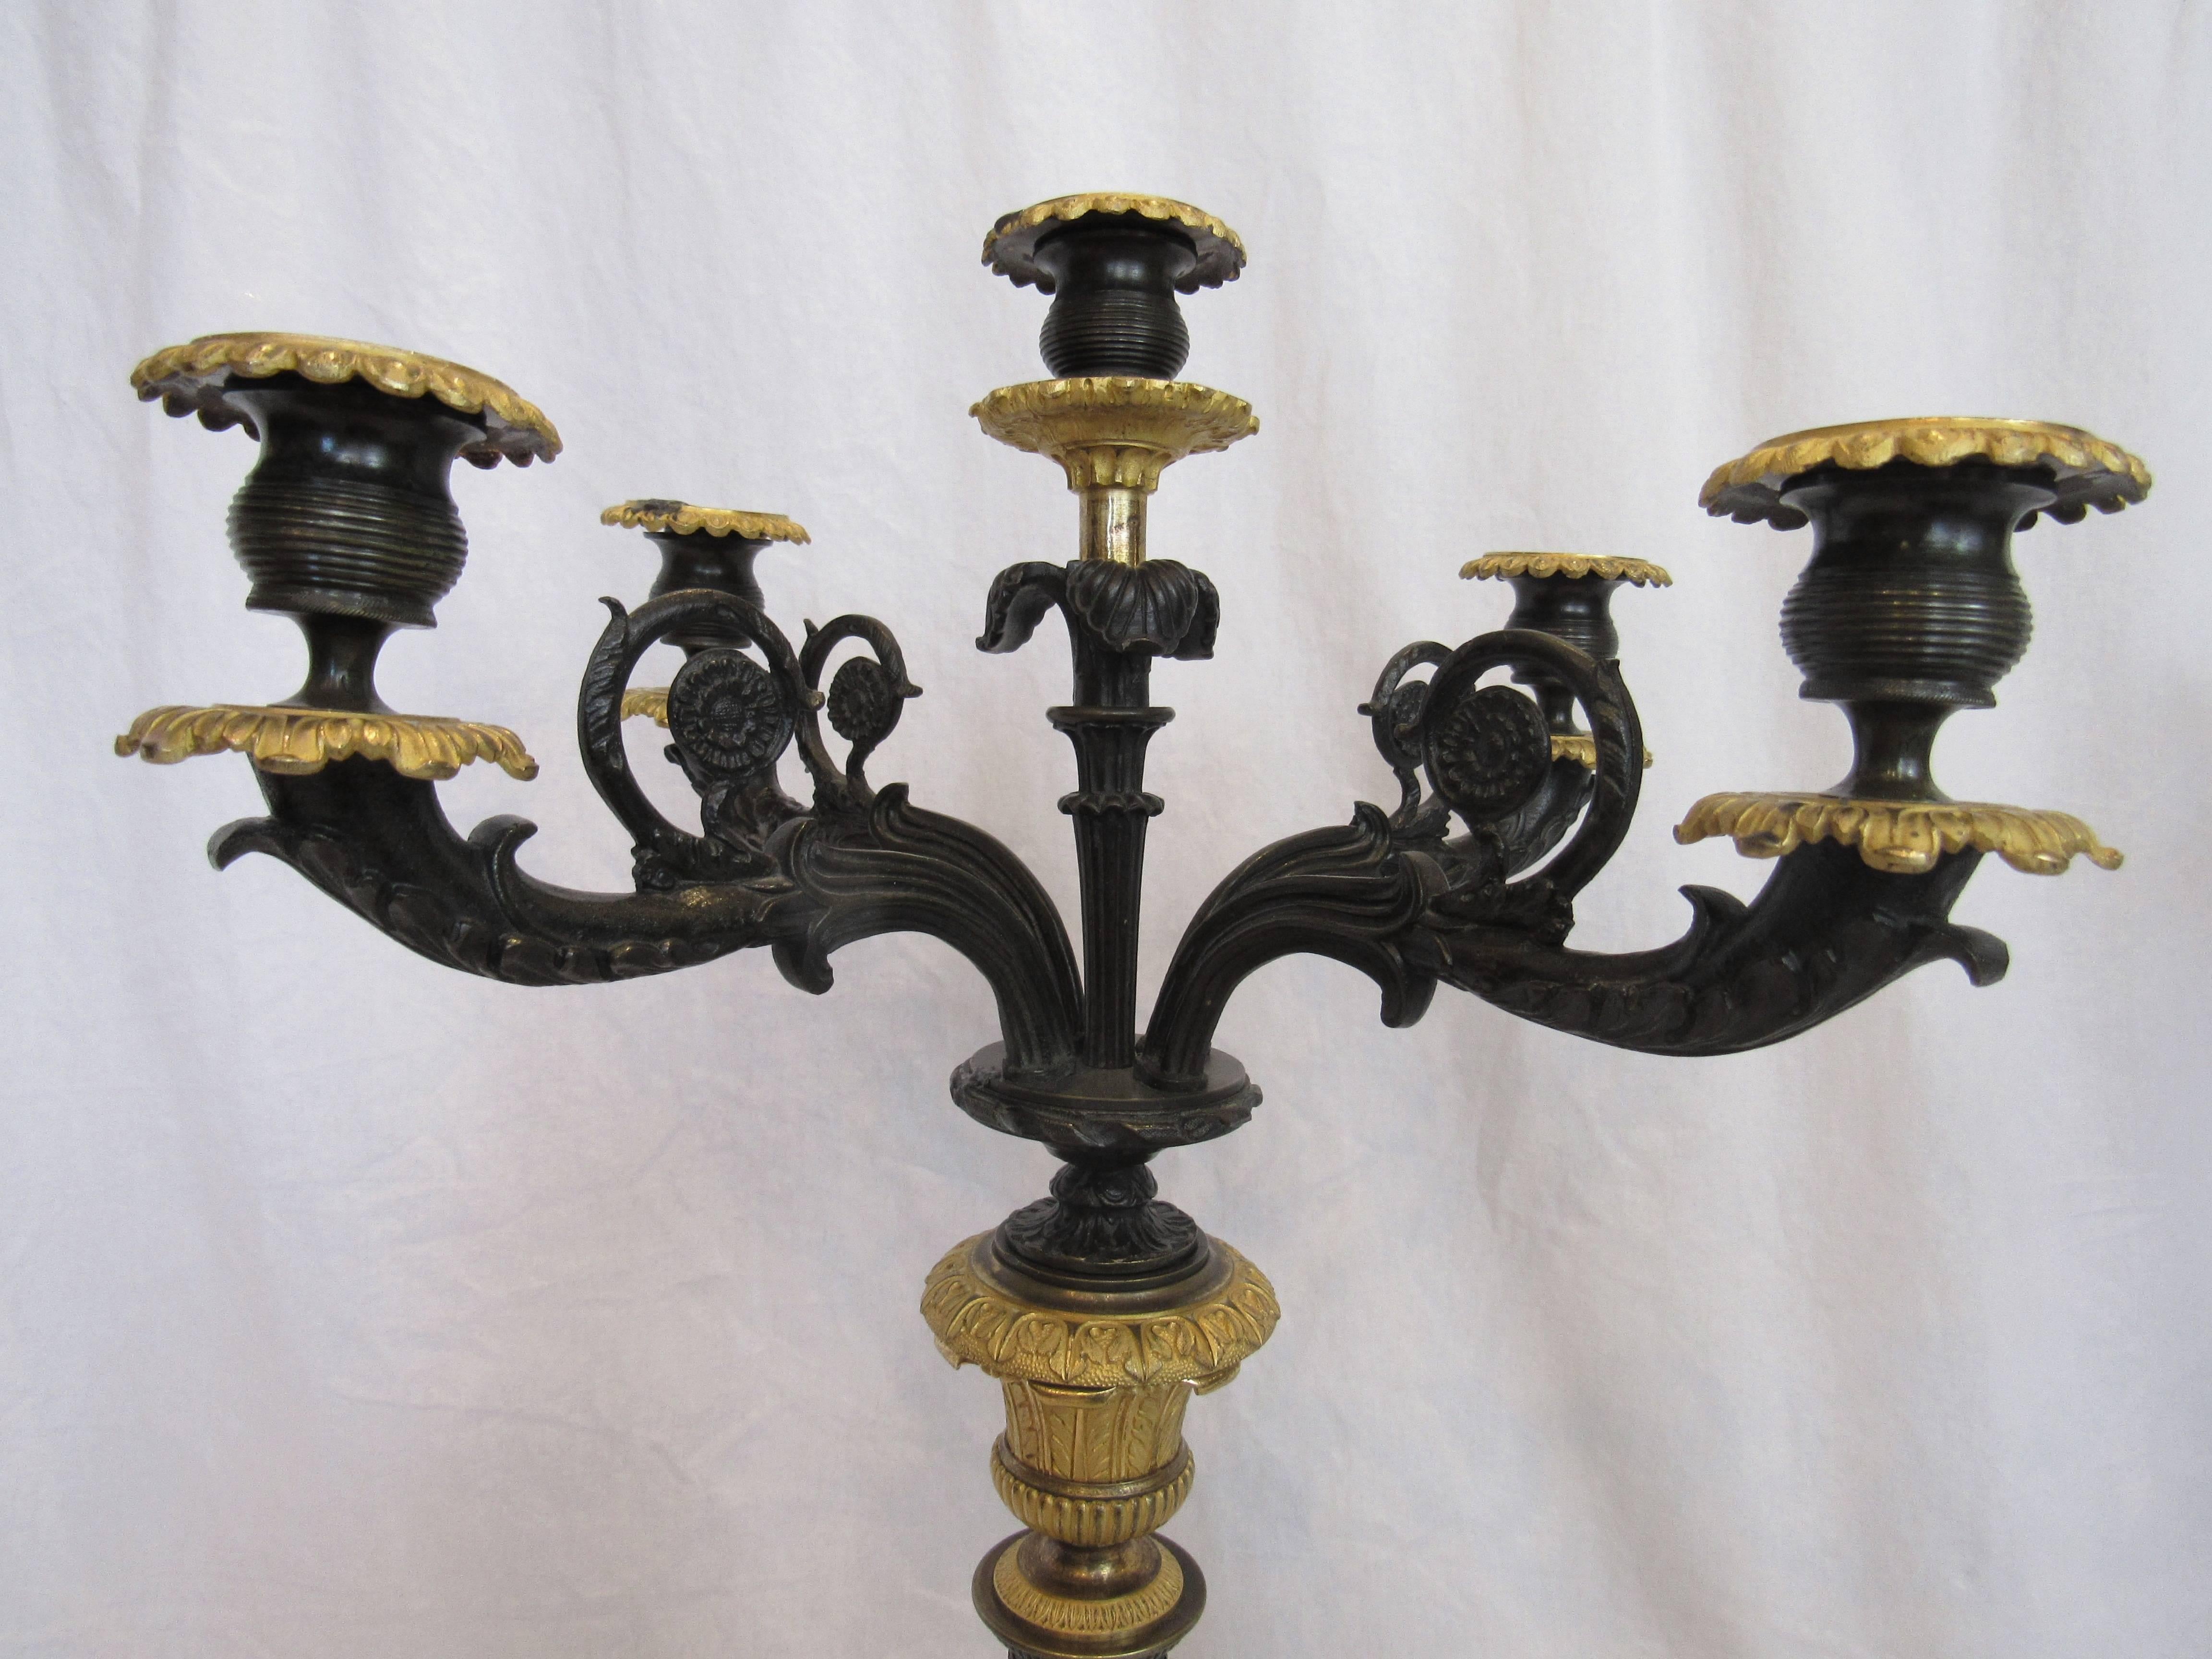 Pair of five-light candelabra. French bronze and ormolu. 19th century.

Empire style, large-scale with paw feet and bronze doré accents. Beautiful condition.

Measures: 28" total height by 15" by 15".